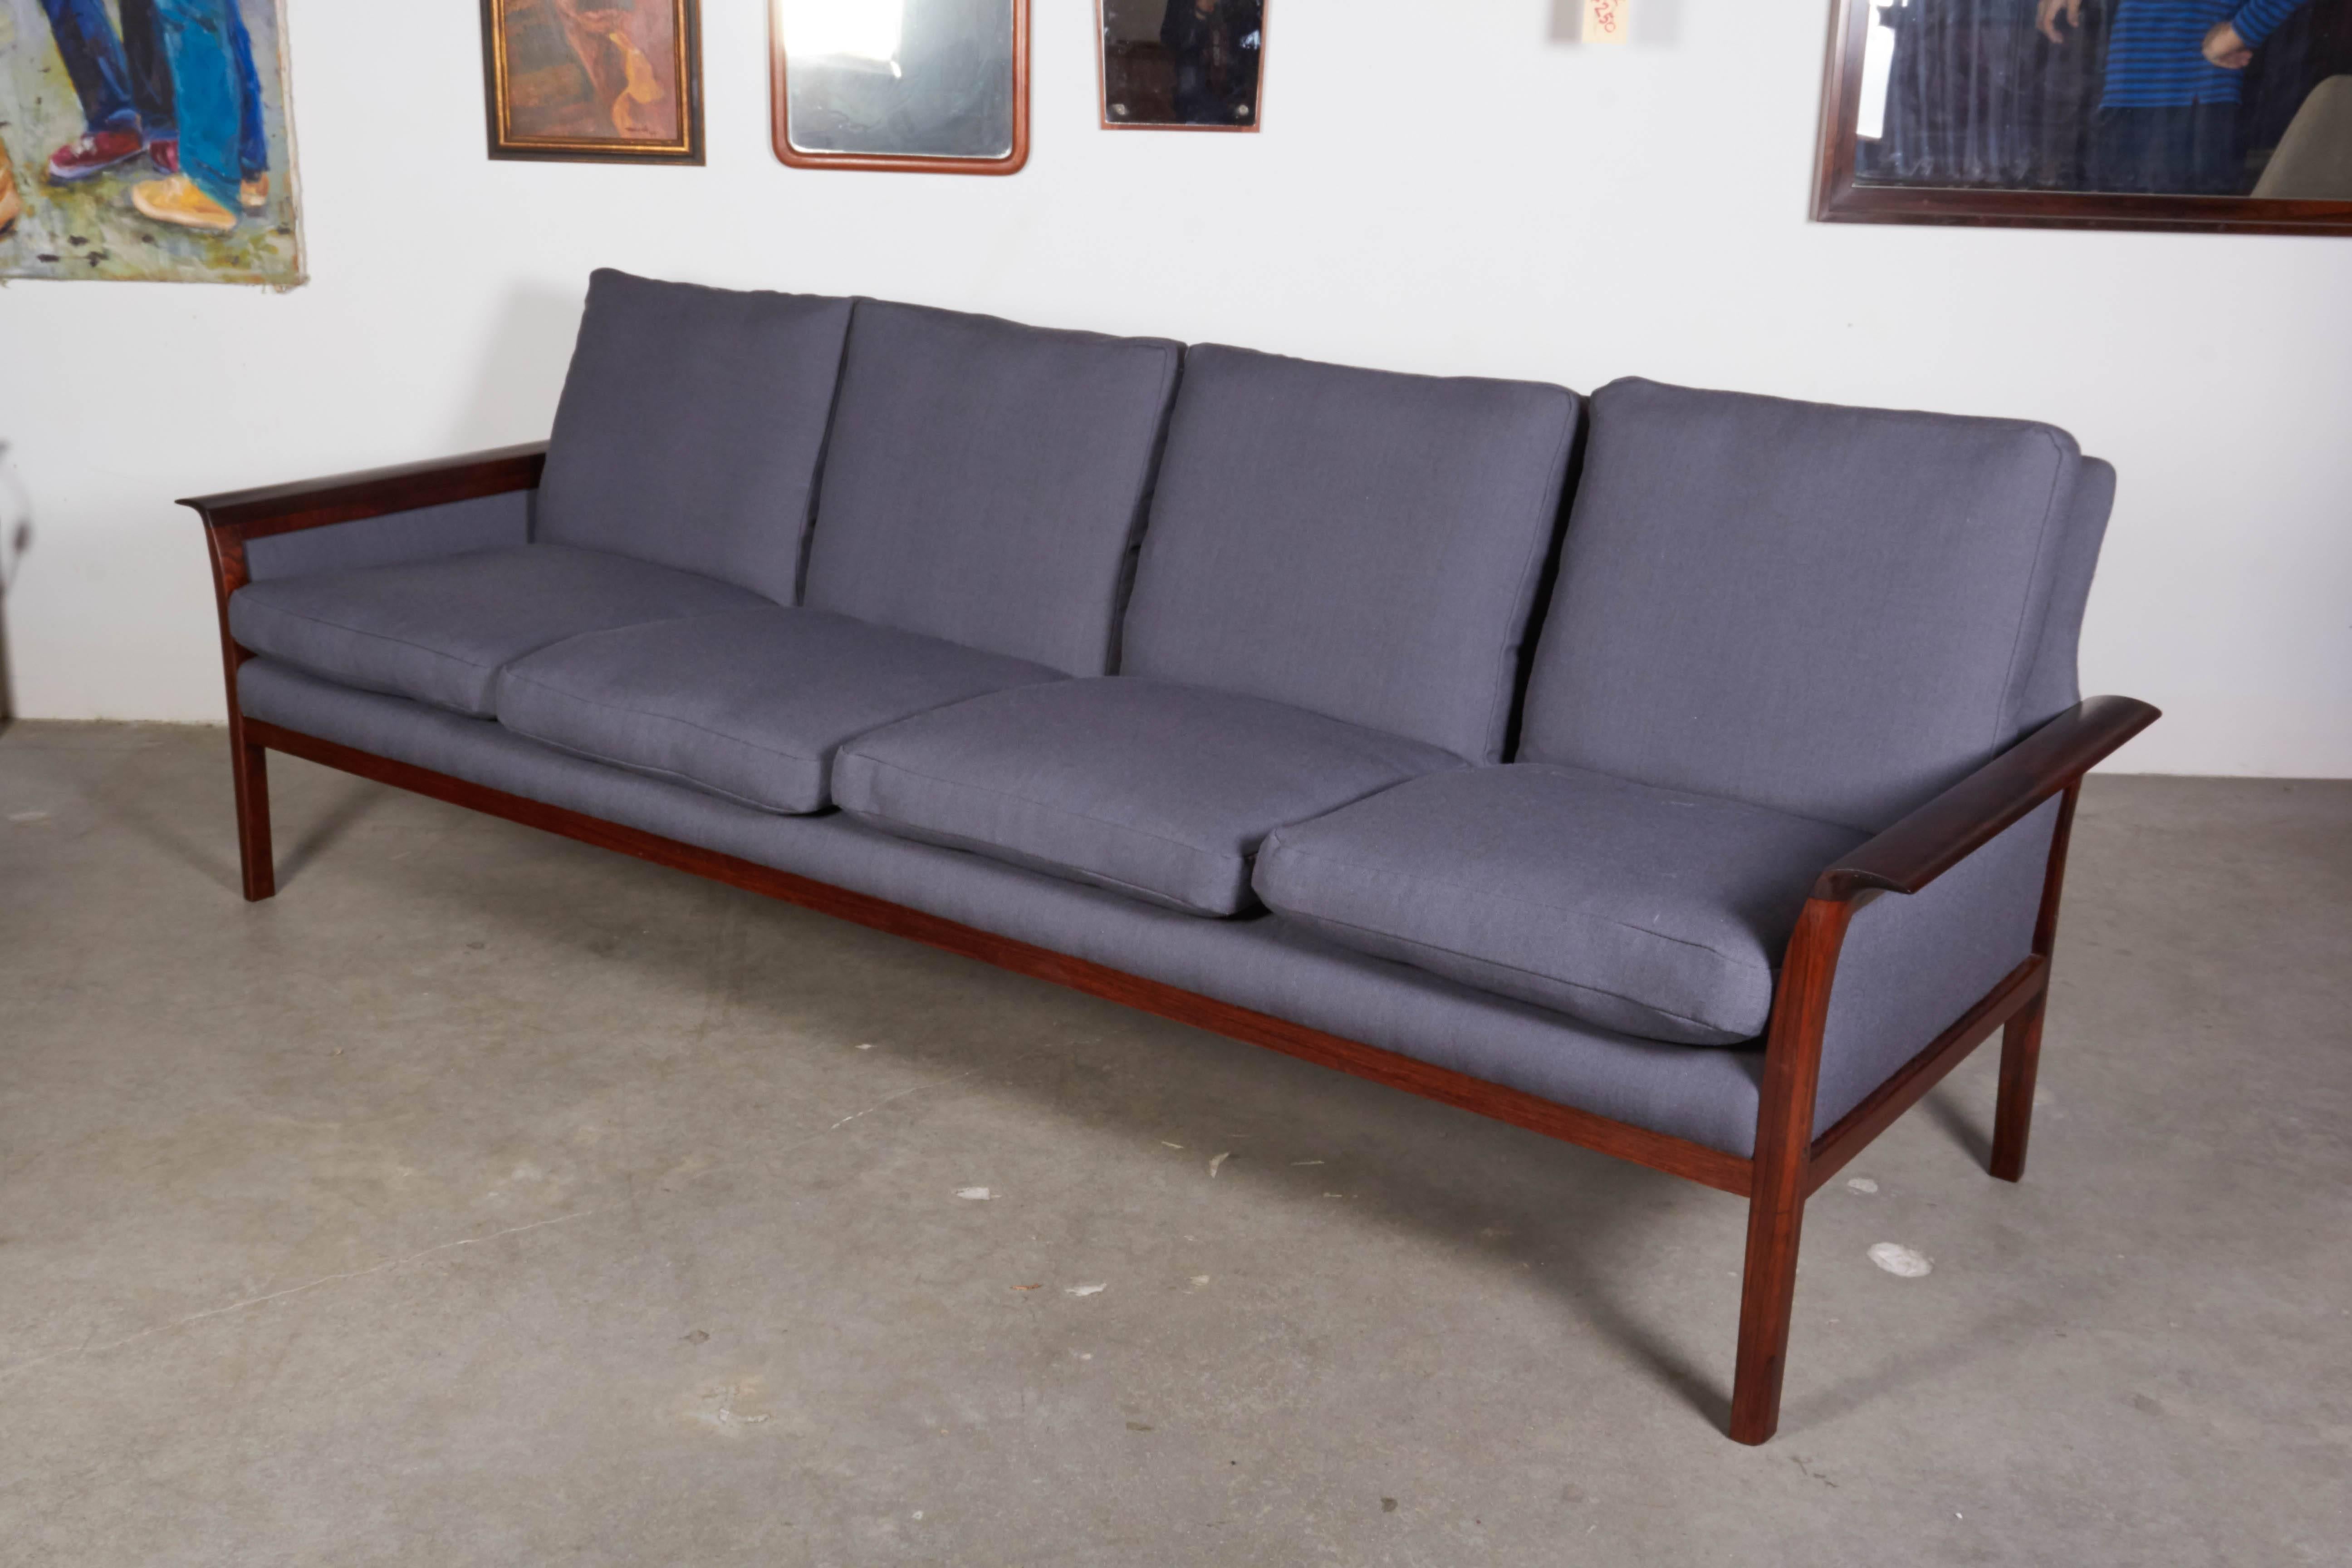 Vintage 1960s Rosewood Sofa by Knut Saeter 

This grey or blue sofa is made up of a rosewood frame and feather and down cushions. Nice shallow depth yet very comfortable. Each cushion is more like a pillow. We upholstered it in a wool blend or for